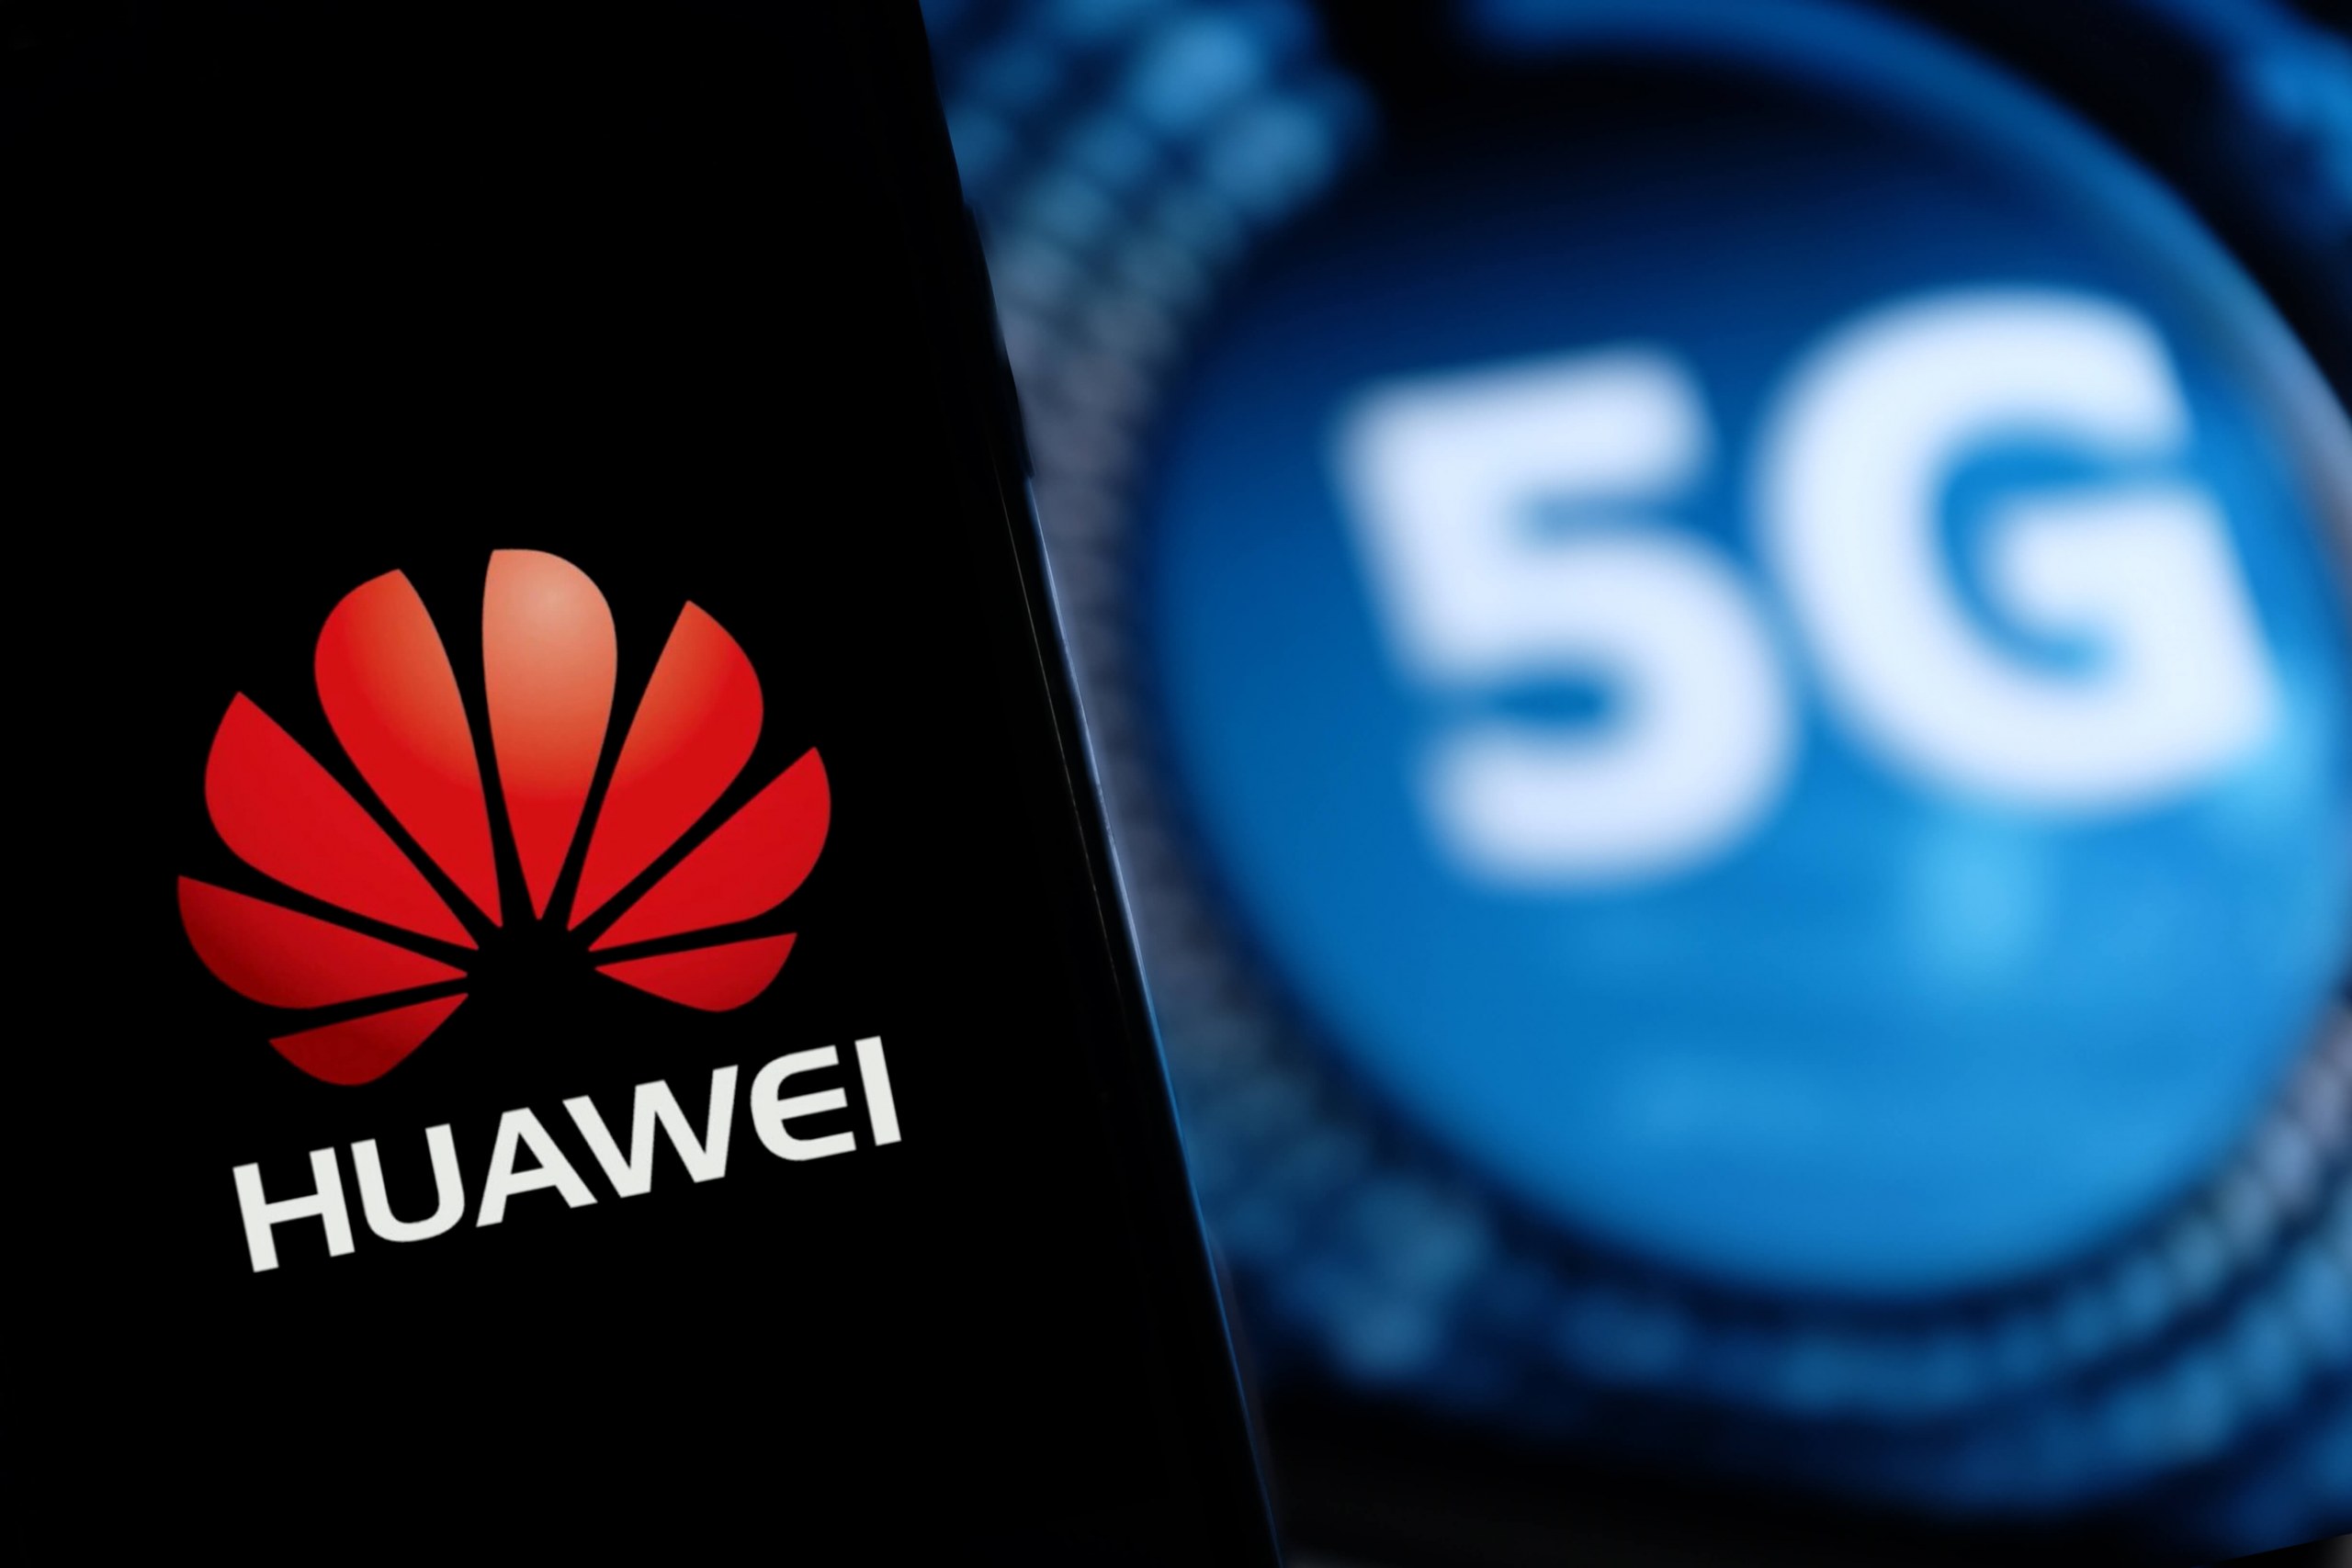 UK to ban Huawei equipment in 2021 and remove it from 5G networks by 2027